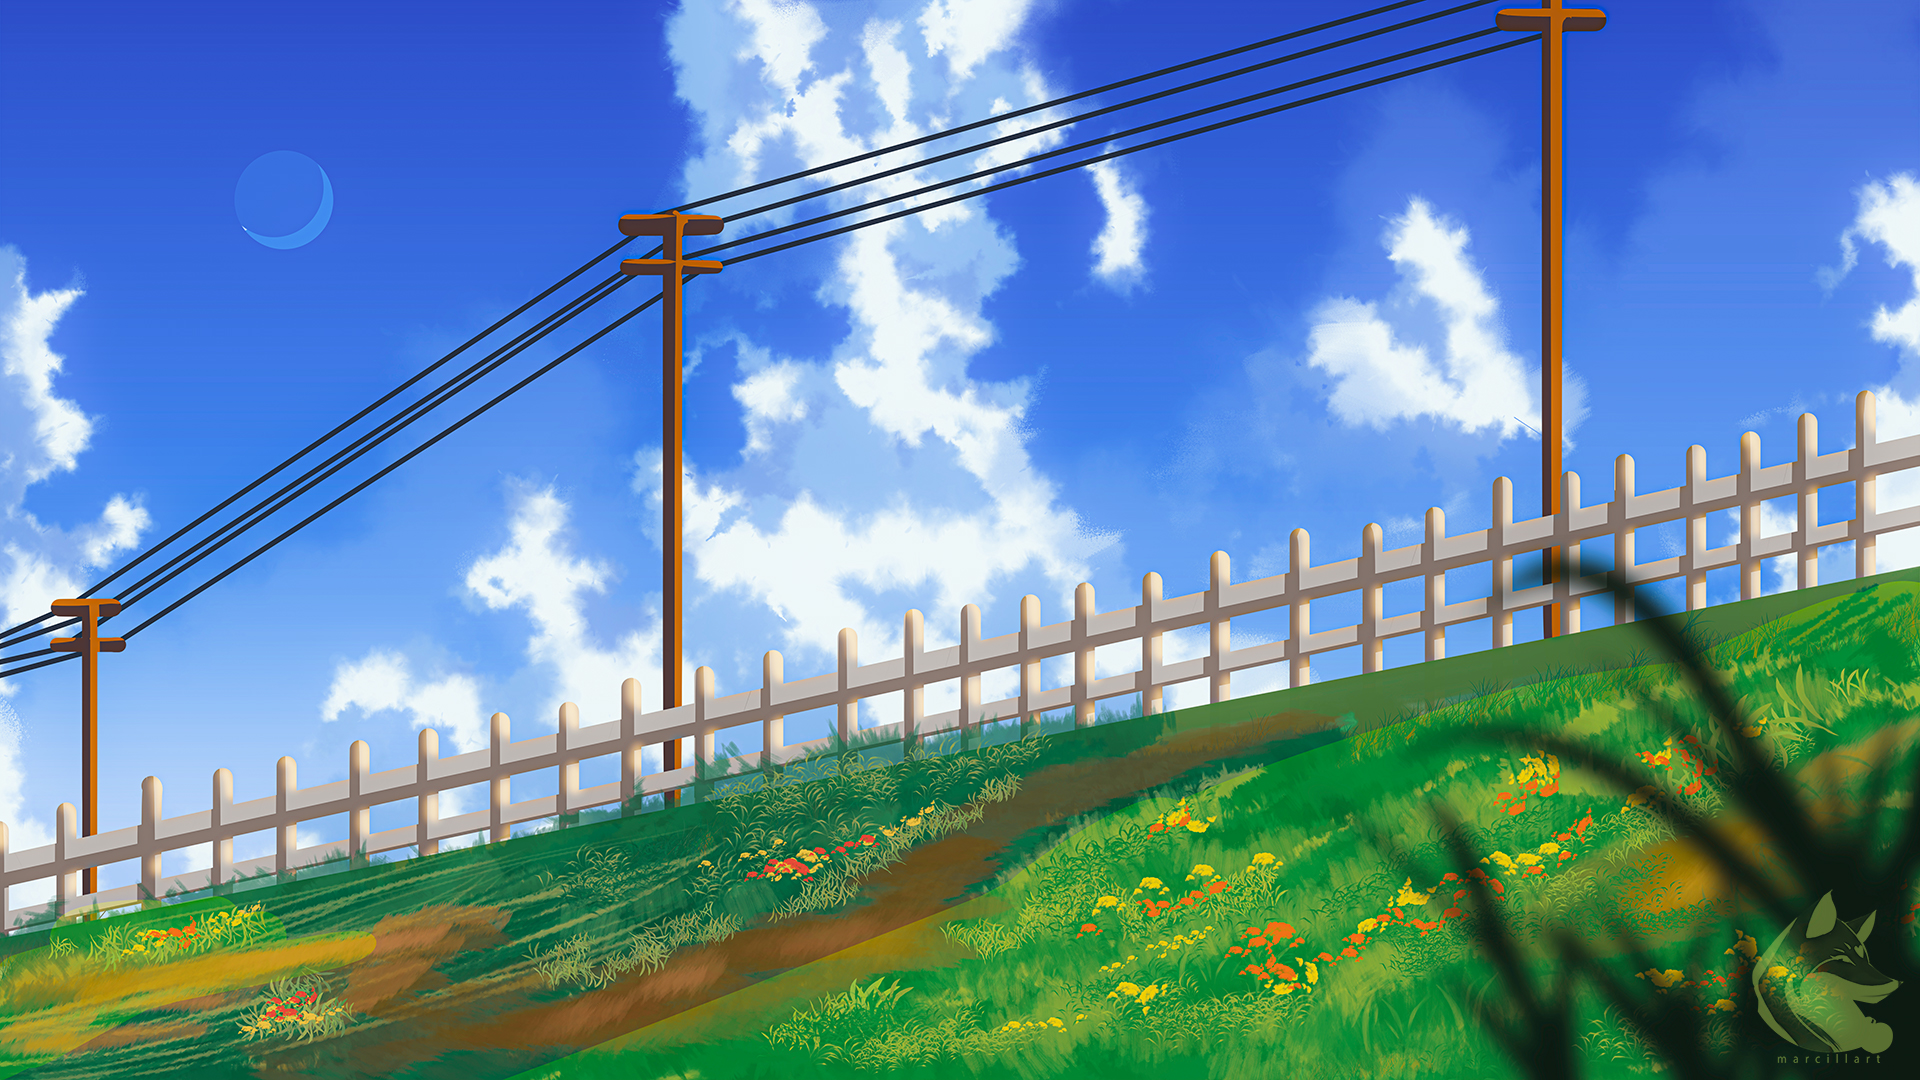 General 1920x1080 clouds clear sky grass electric line utility pole flowers summer spring